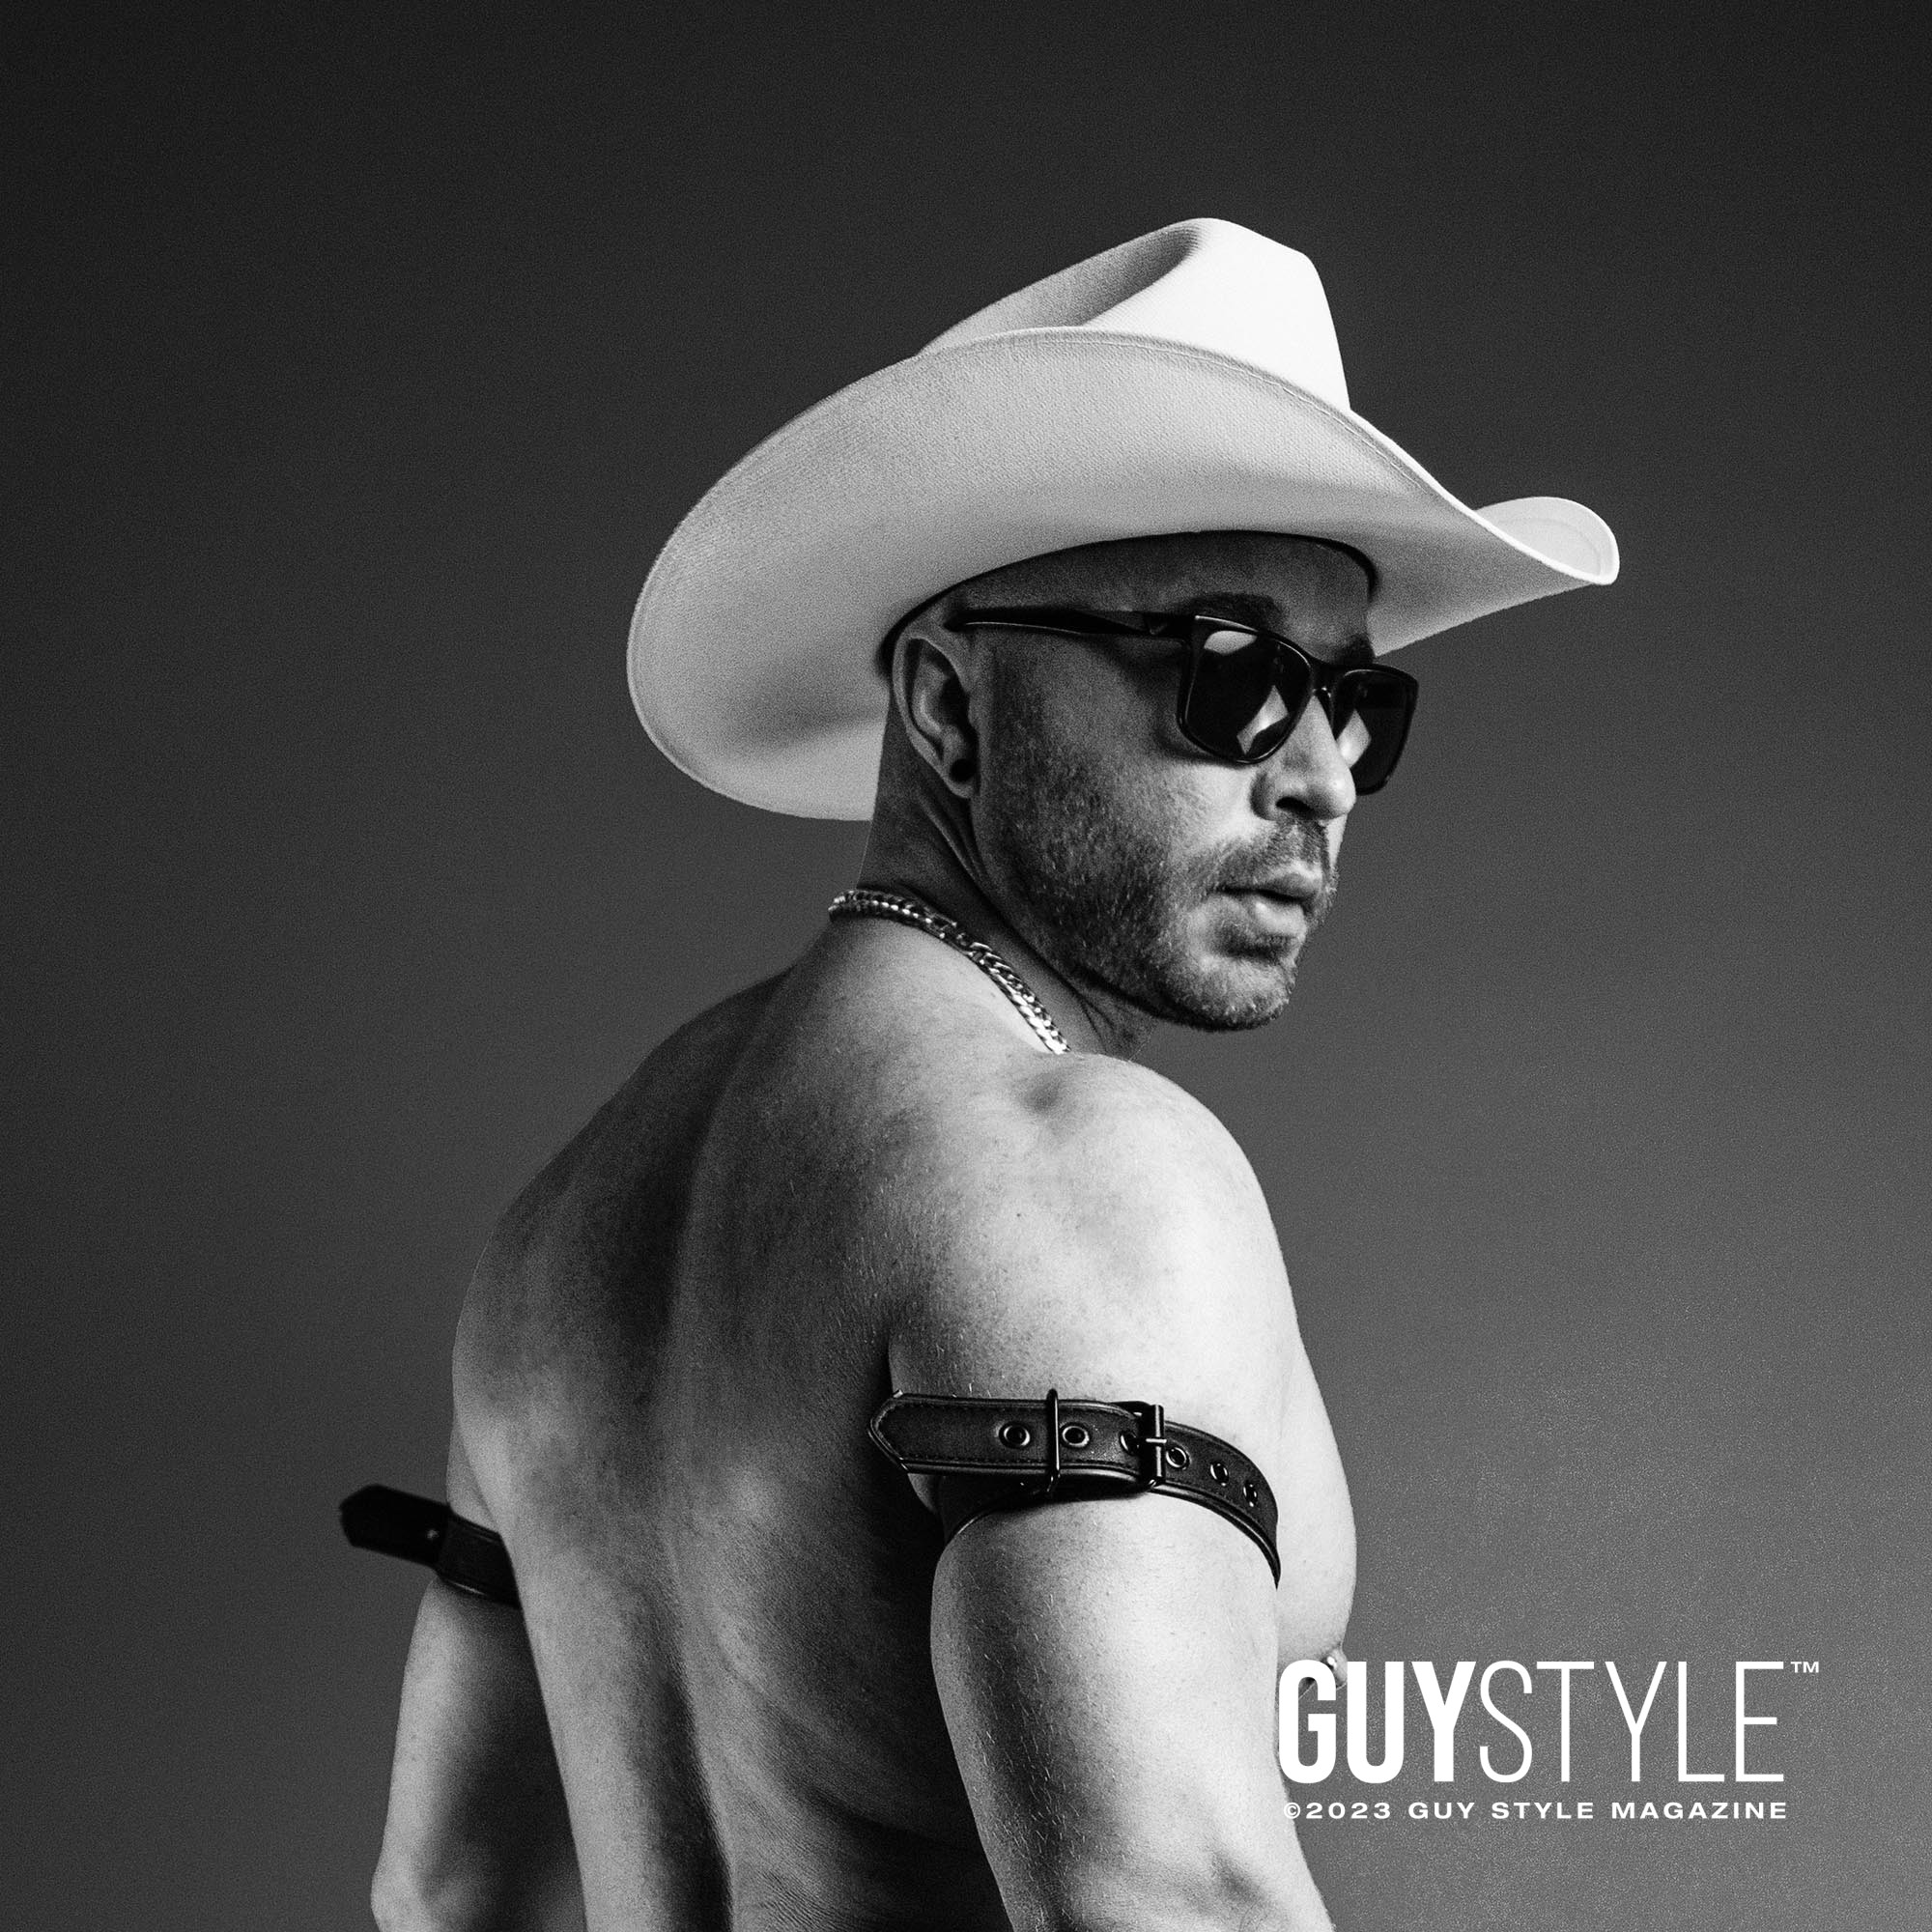 Teal Temptation – NYC Male Boudoir Experience Photoshoot by Male Boudoir Photographer Maxwell Alexander Starring Cocky Cowboy